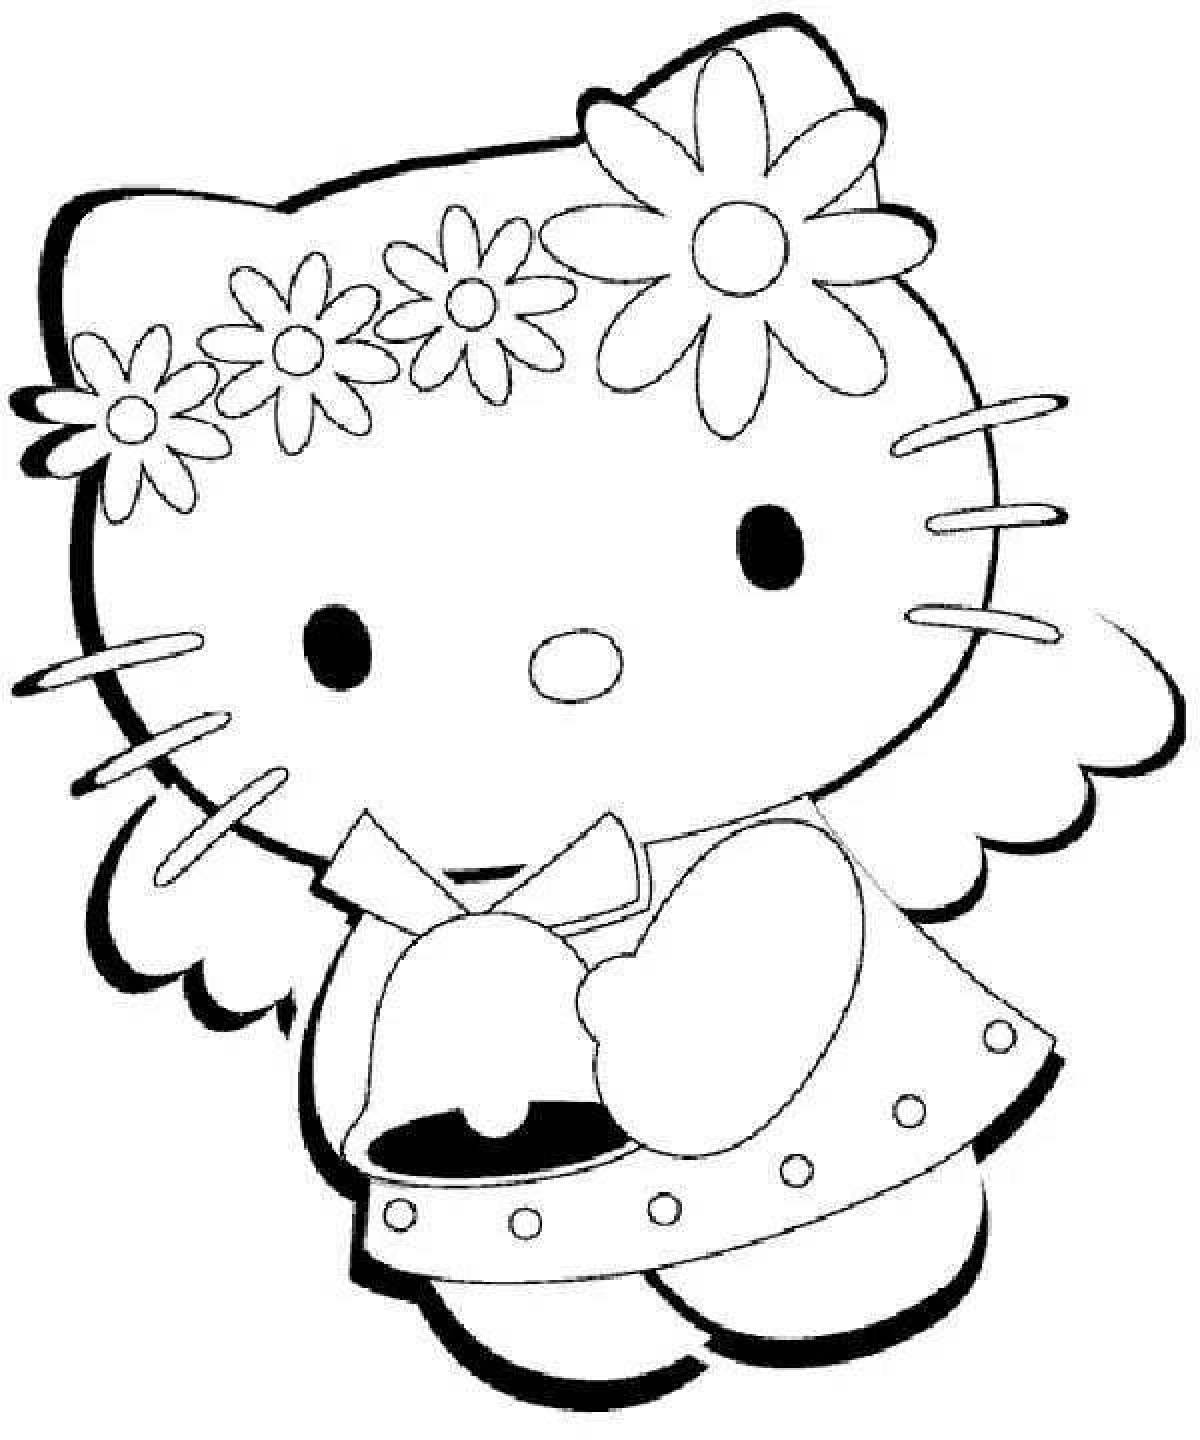 Exciting coloring hello kitty chickens